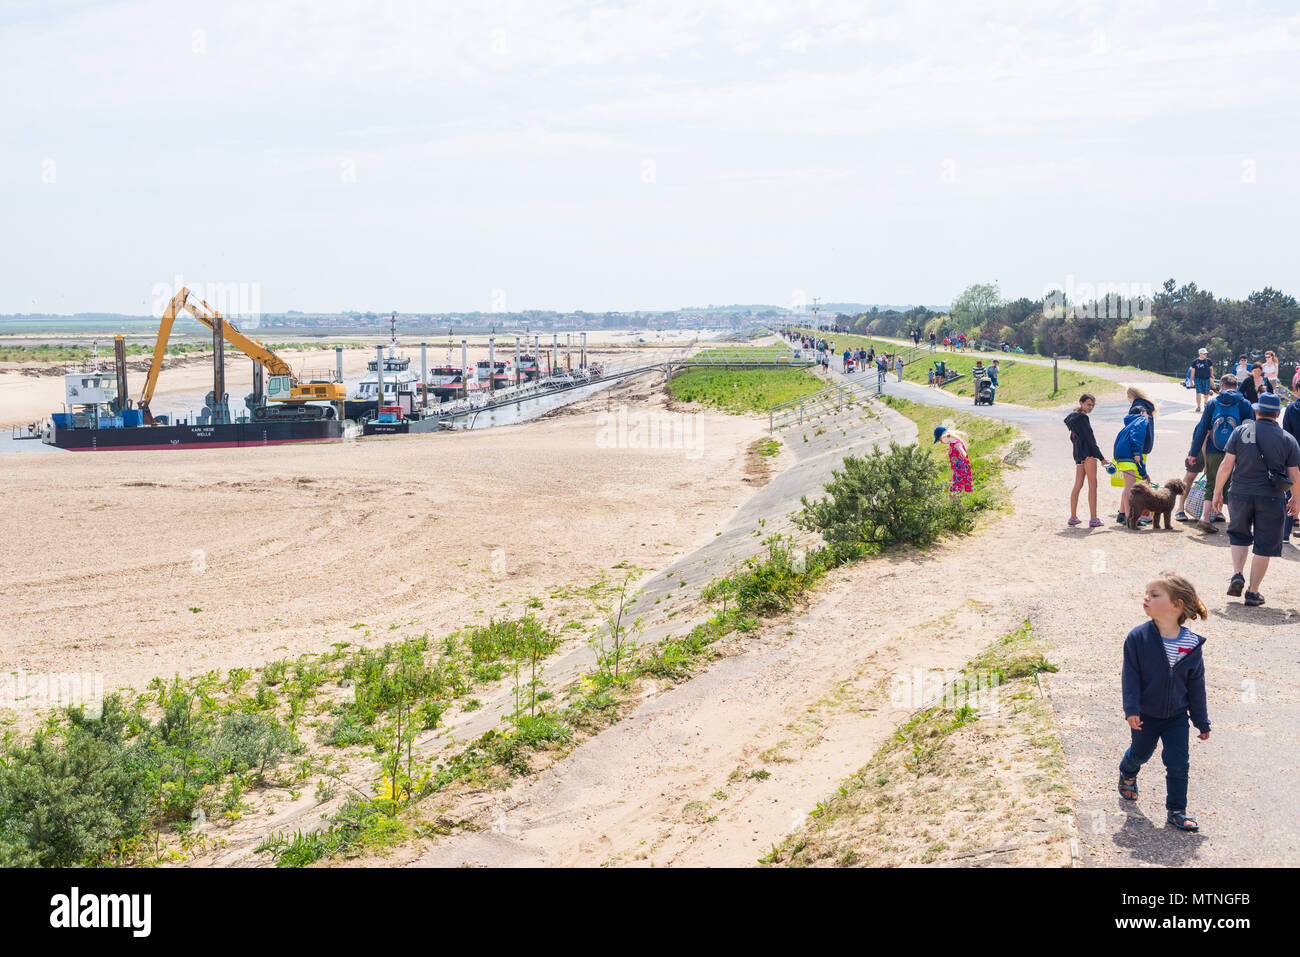 Wells-next-the-Sea, Norfolk, UK. 27th May 2018. People walking along the footpath leading to the beach of Wells on a sunny warm day during the Bank Ho Stock Photo